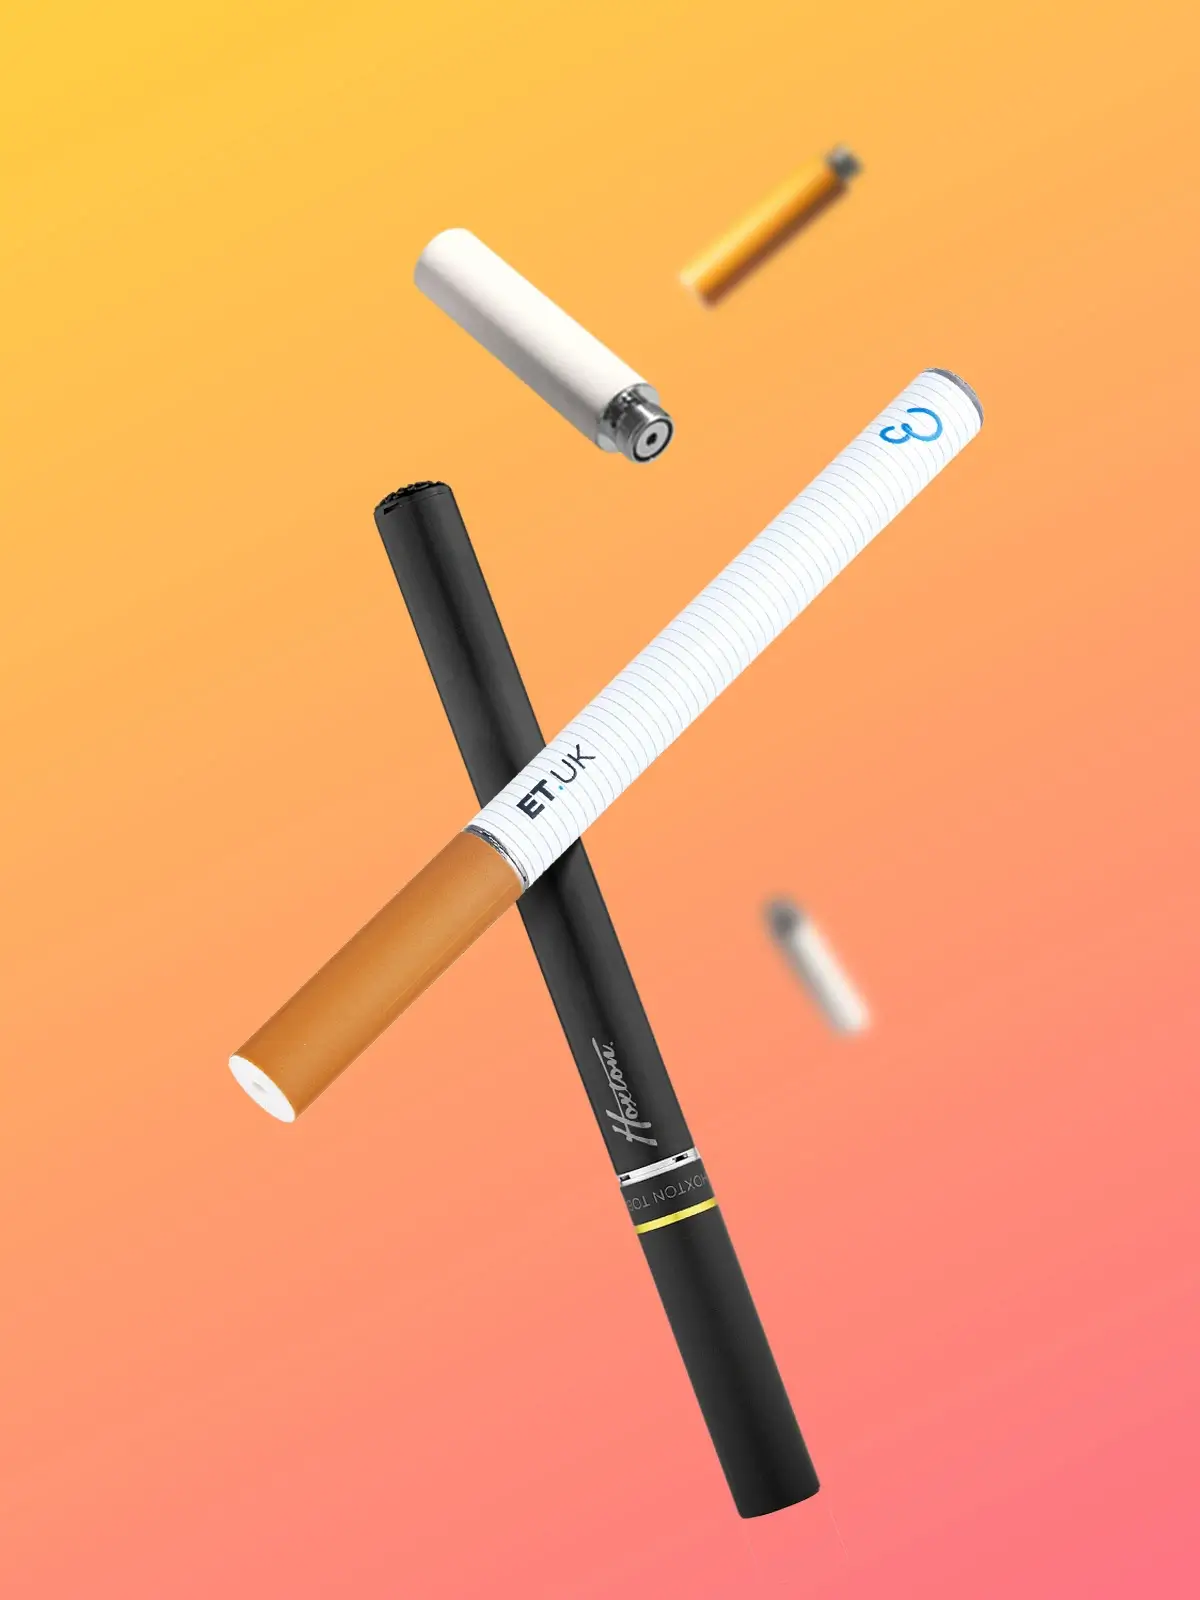 An ET.UK cigalike battery along with a Hoxton Black Edition cigalike battery, floating together with cartomizer refills in front of an orange and peach coloured background